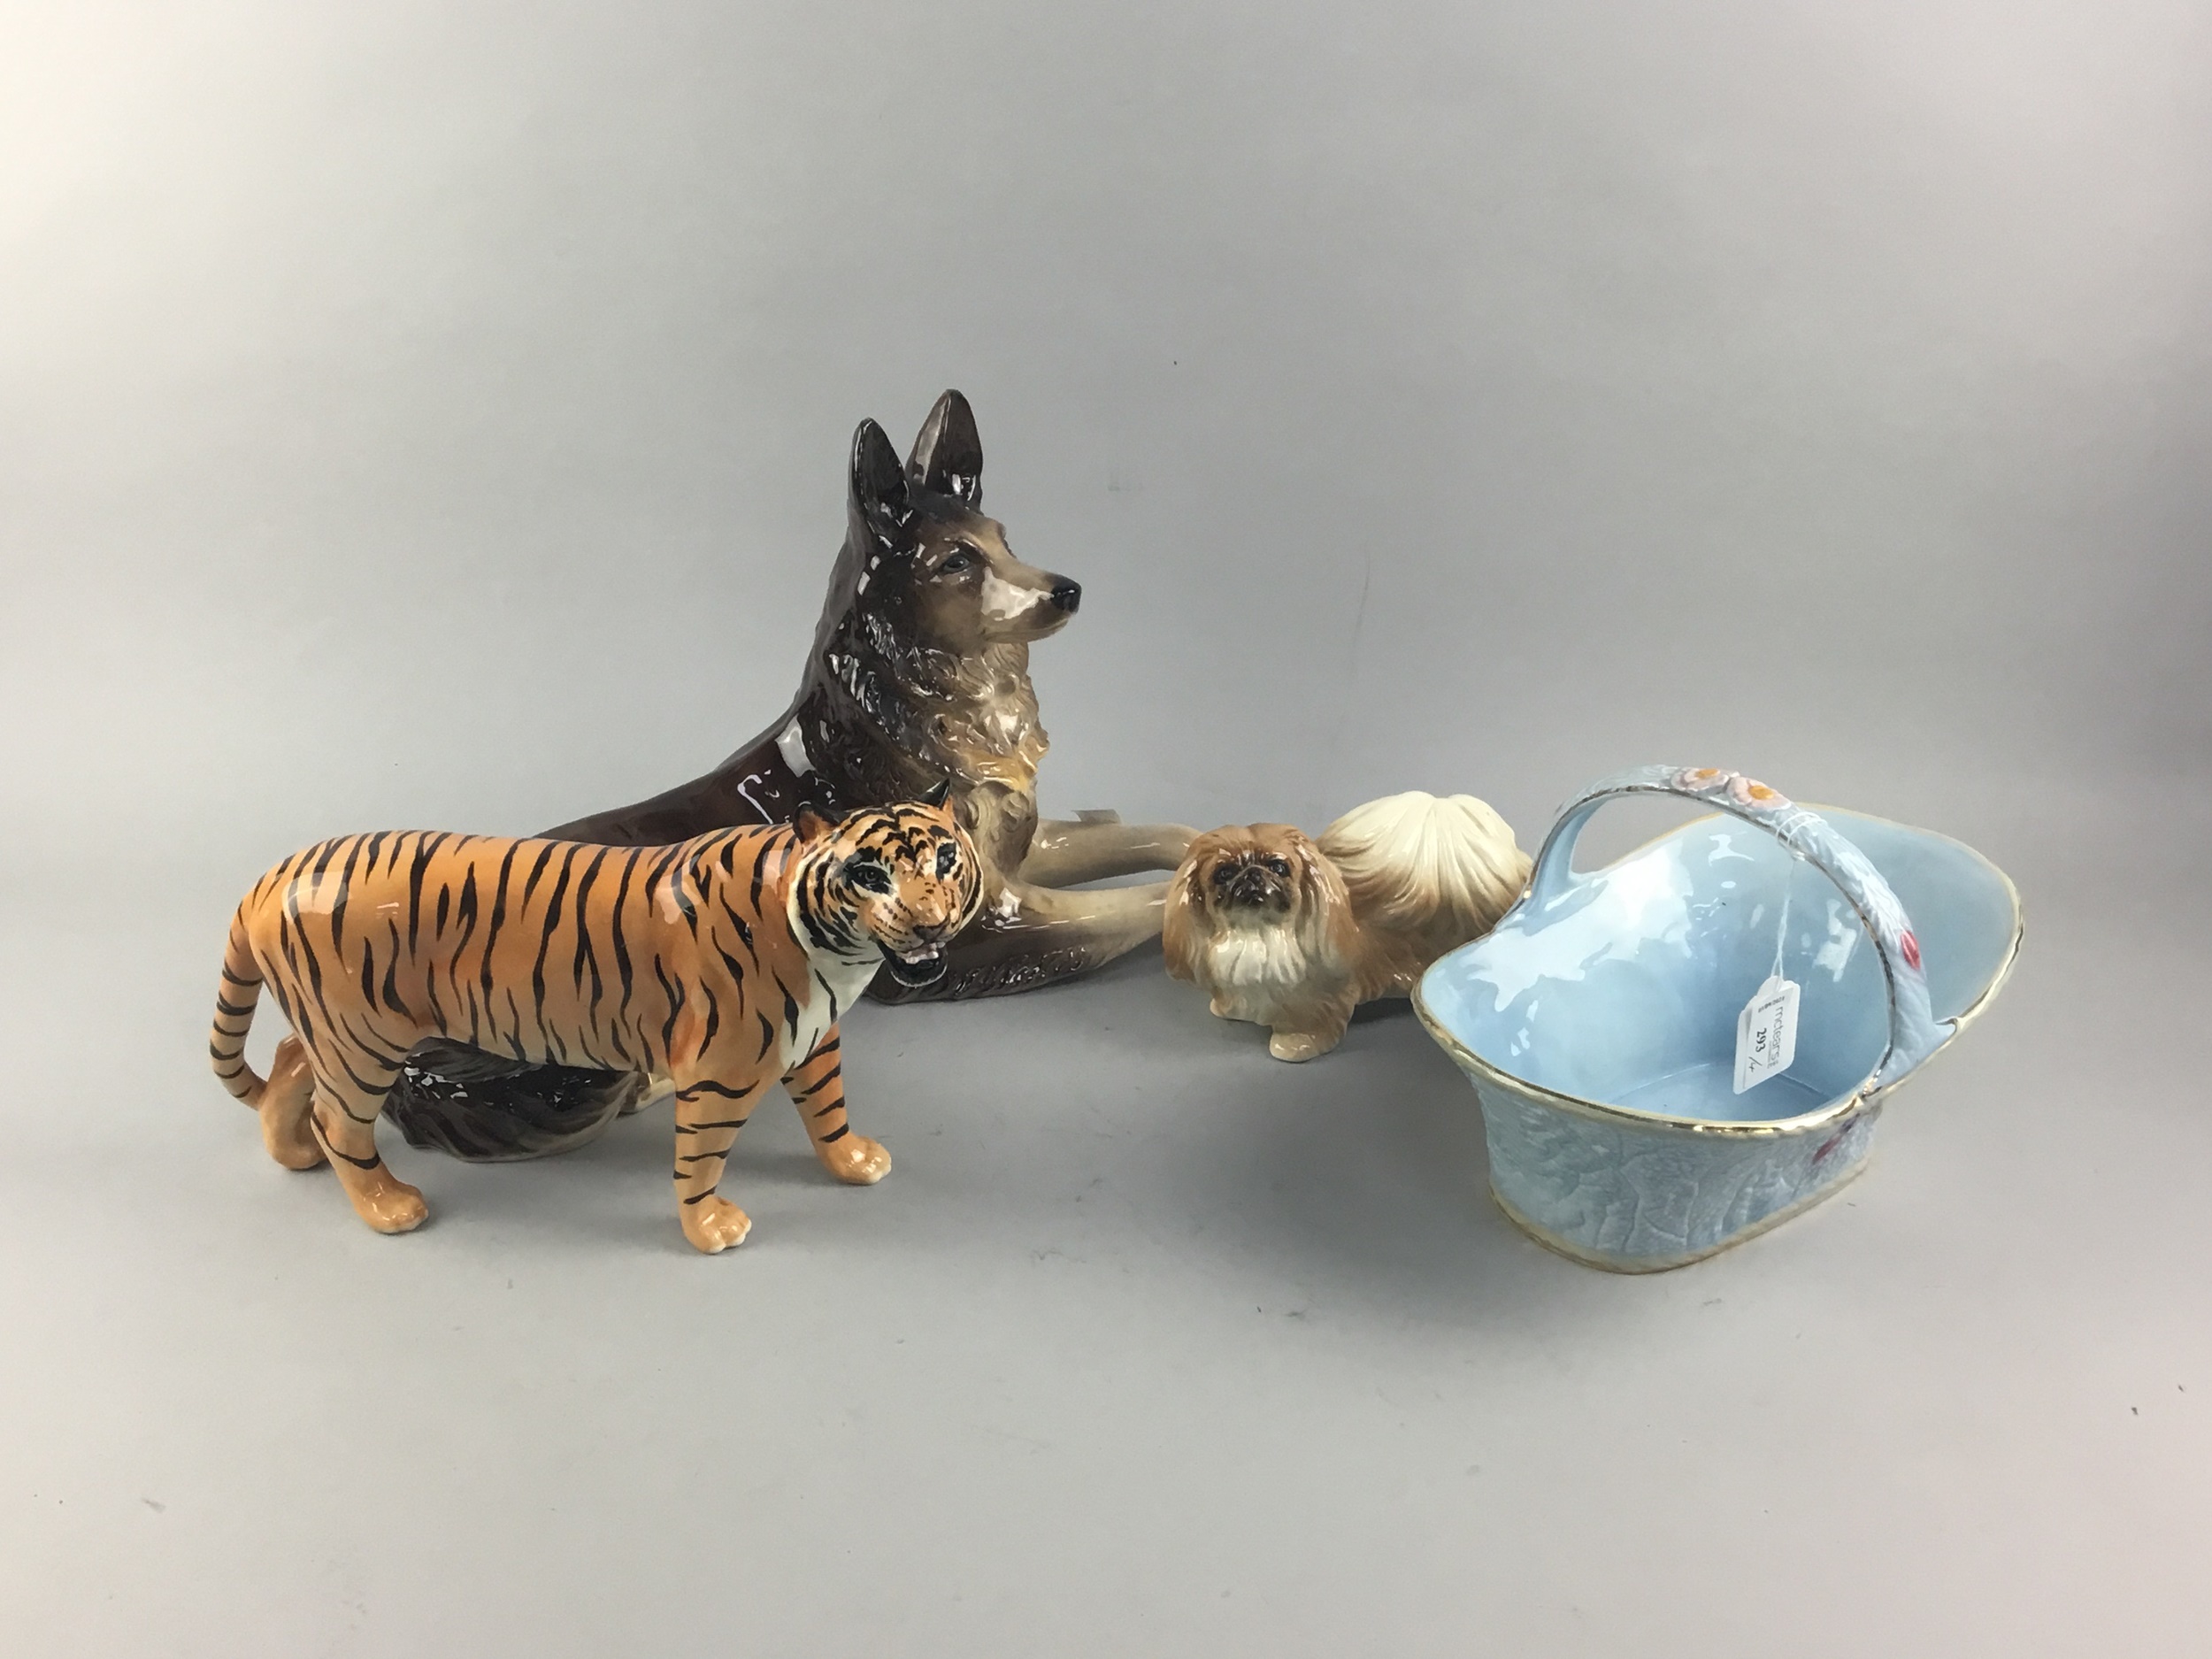 A BESWICK FIGURE OF A TIGER, TWO DOG FIGURES AND A MELBA POTTERY BASKET